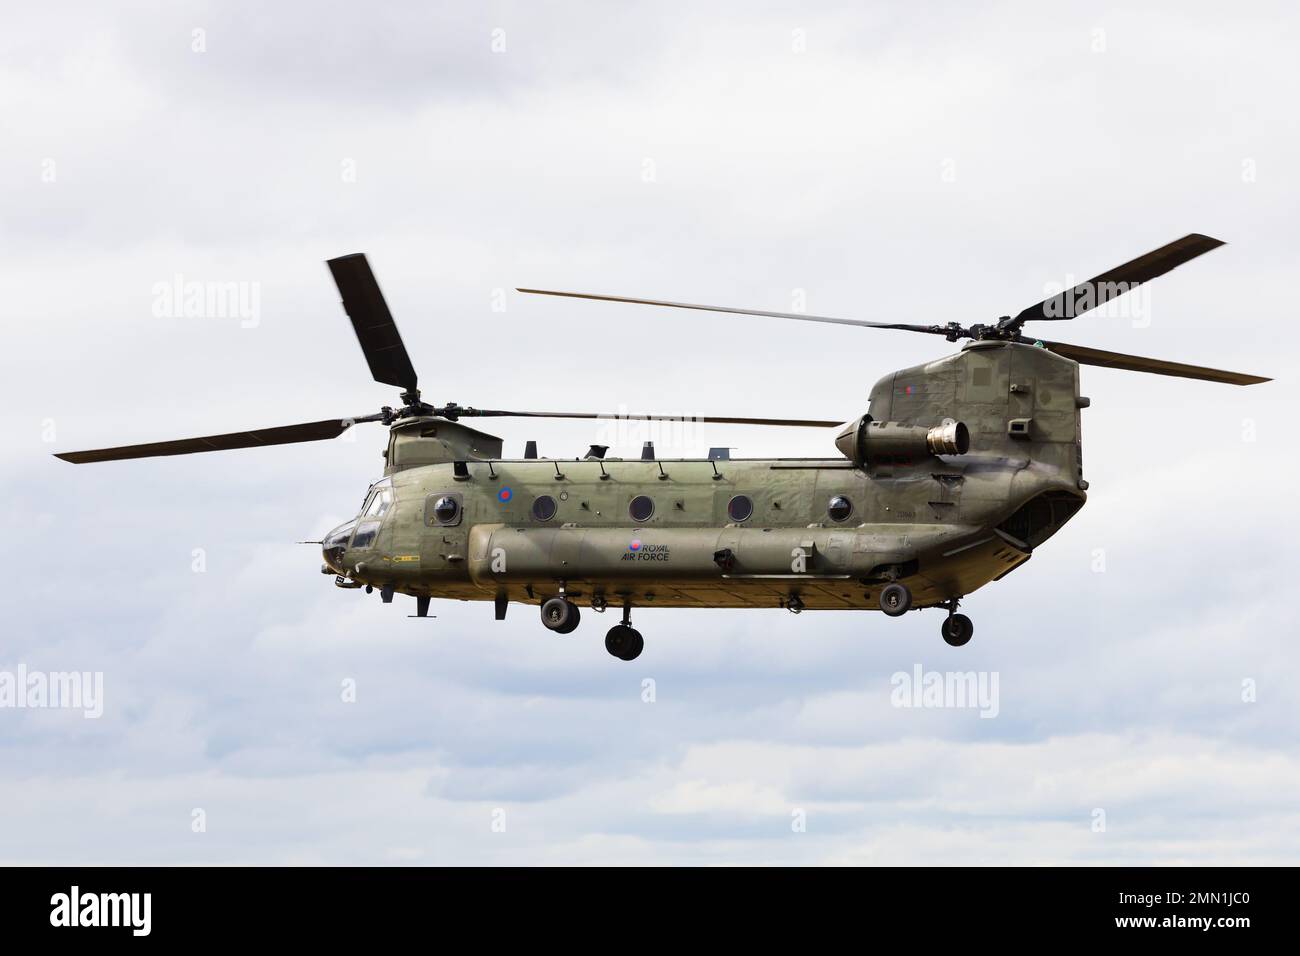 Boeing CH47D Chinook heavy helicopter of the RAF Chinook display team from RAF Odiham makes a low pass. Stock Photo